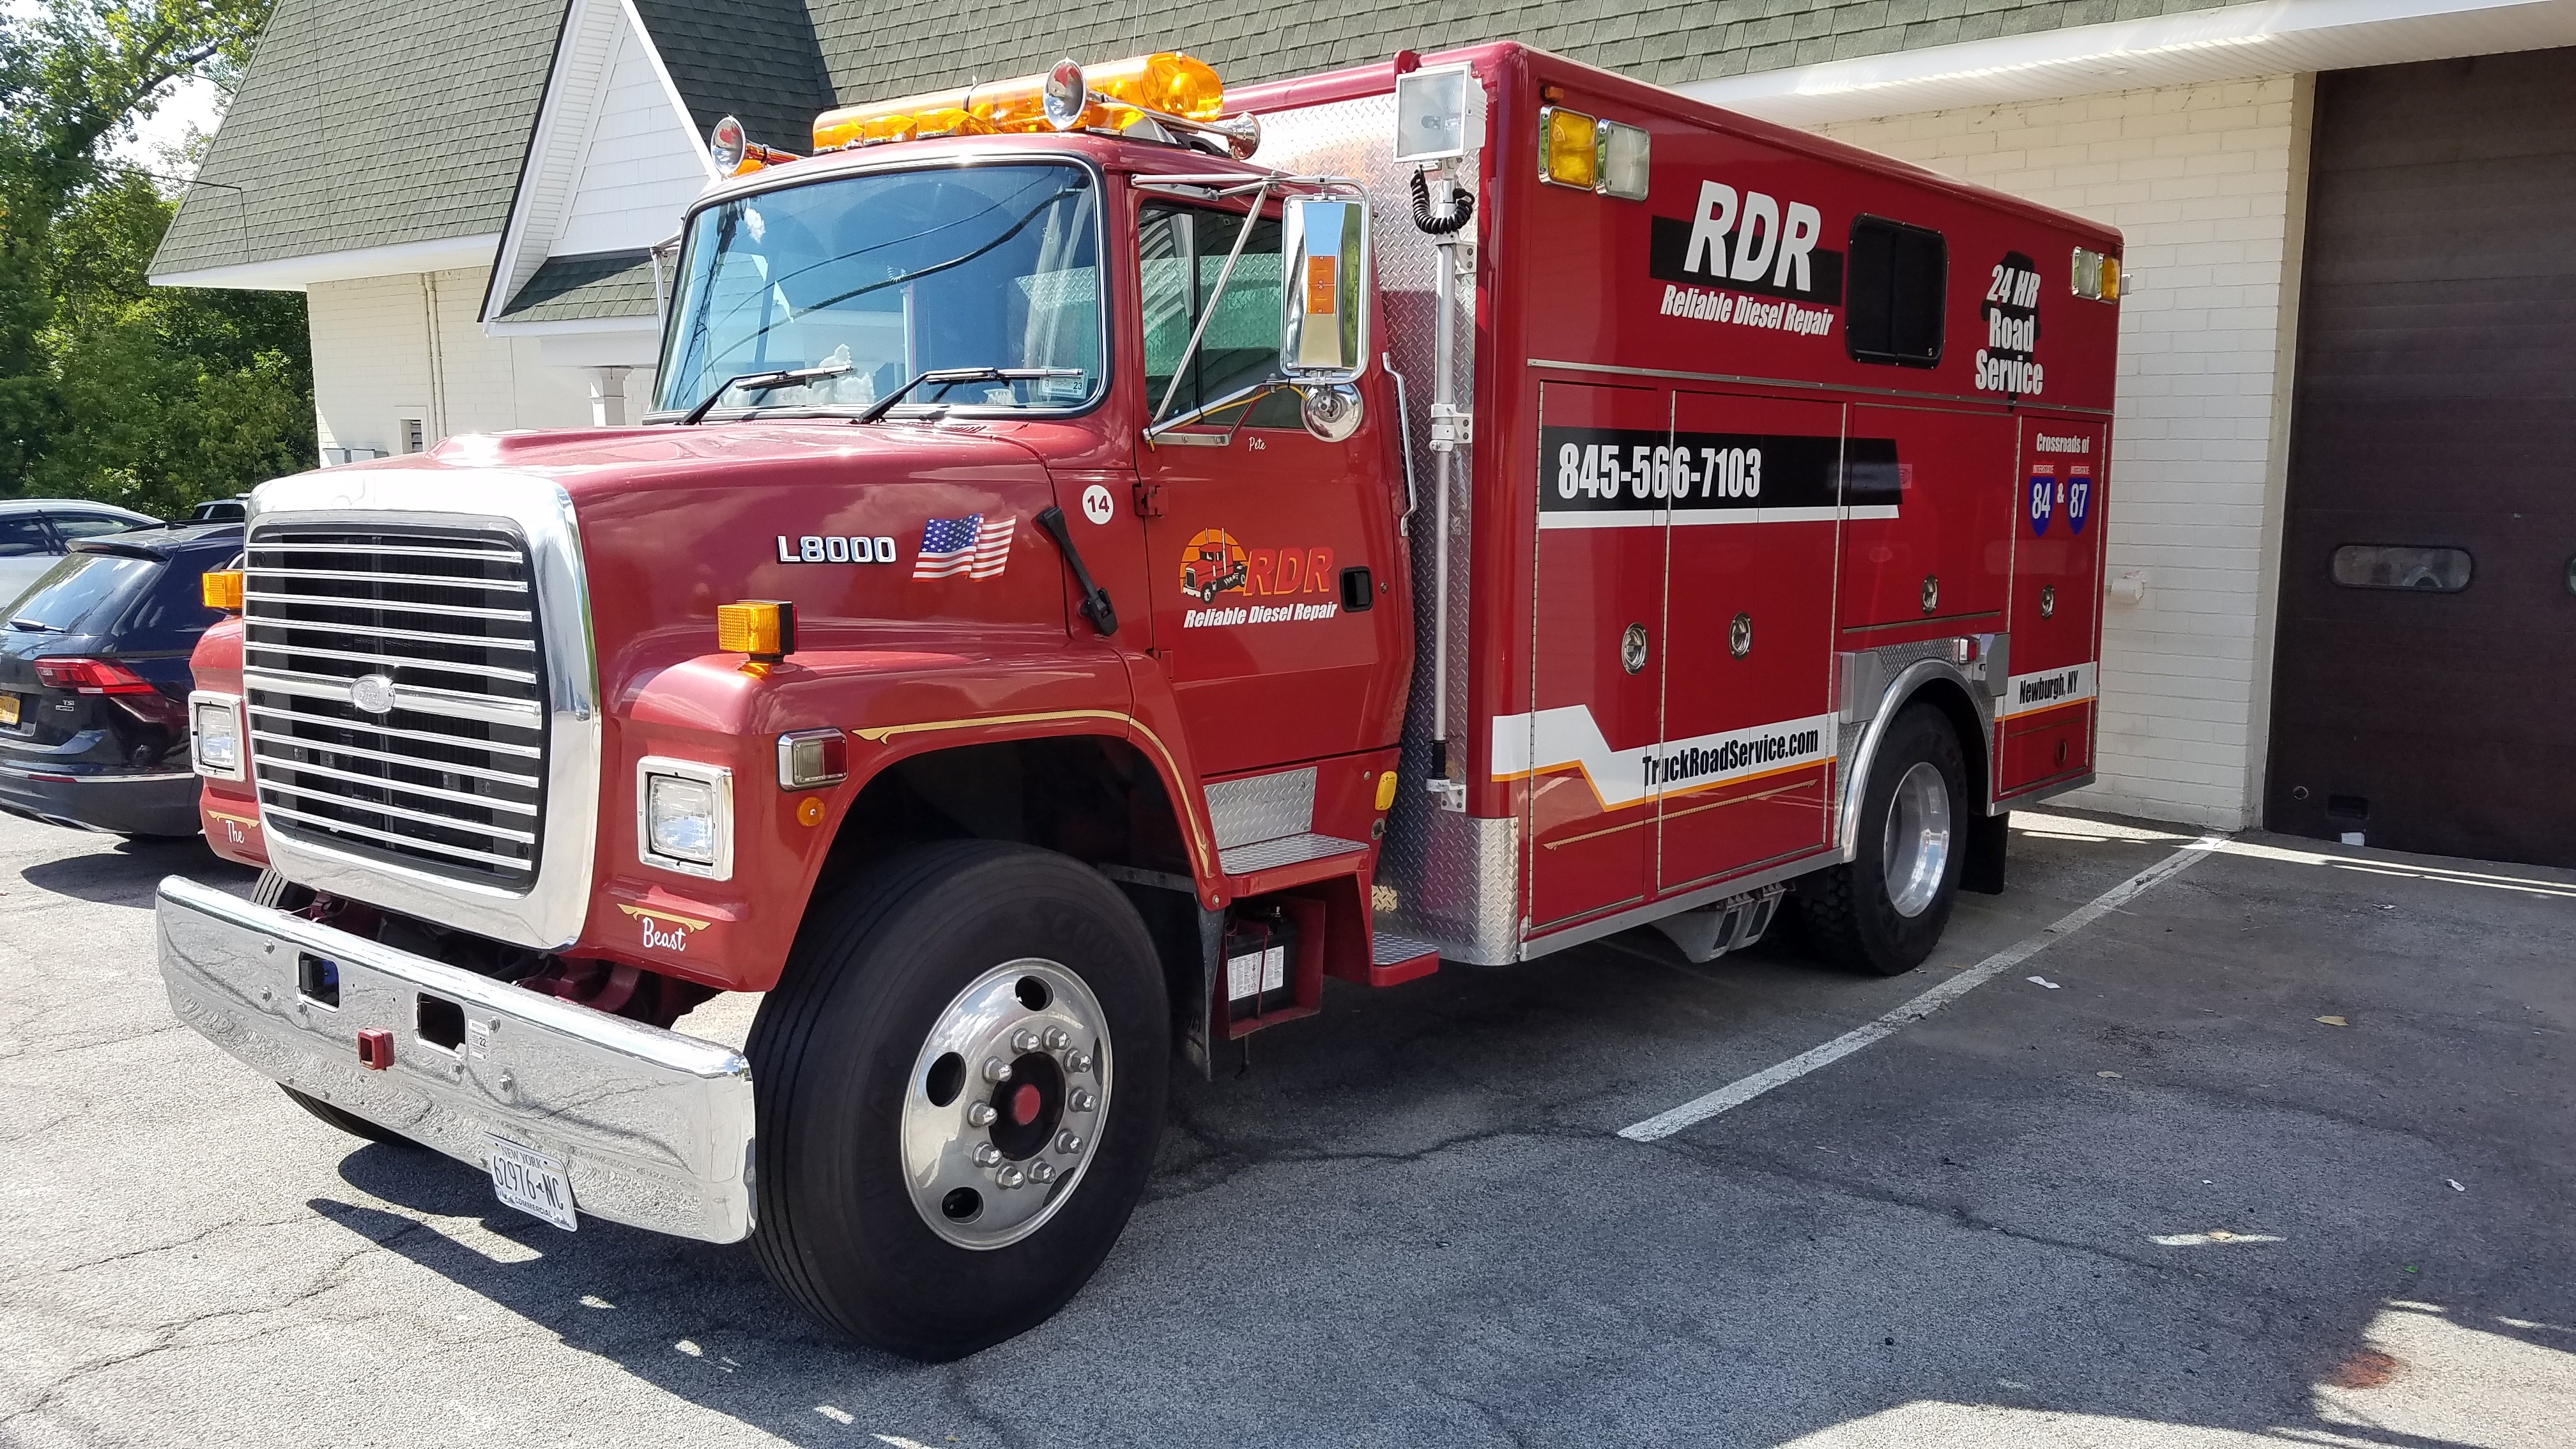 1995 Ford LN8000 with an American Rural Heavy Rescue Vehicle. MD3060 6 Speed Allison